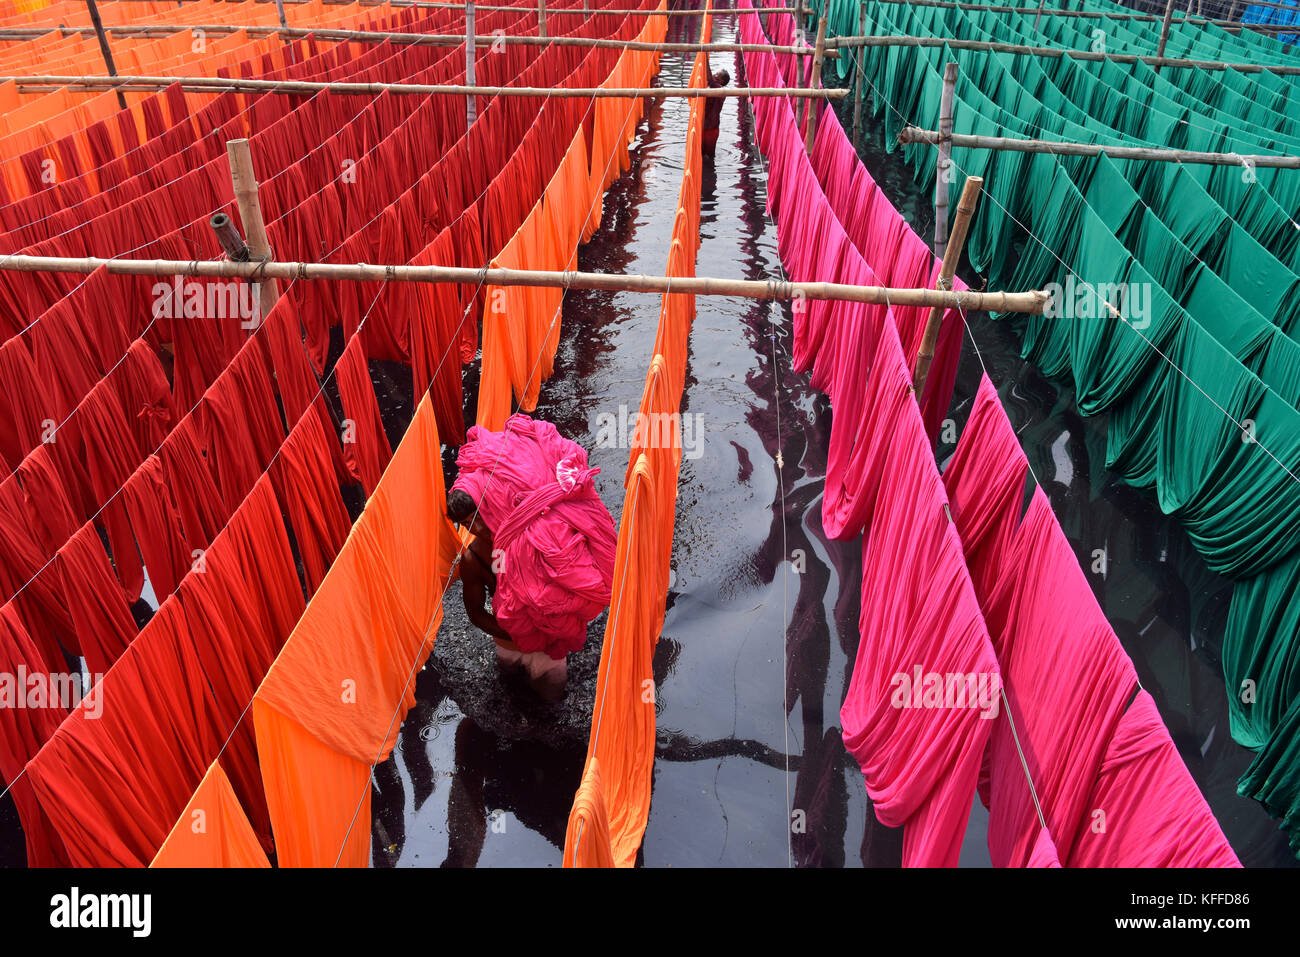 A Bangladeshi worker carries Garments fabric after dries them under the sun at Narayanganj, near Dhaka, Bangladesh. Knitting is the manufacturing stage that converts yarn into fabric through the process of interlocking loops. Weaving is the process of fabric formation in which yarns are interlaced at right angles using a weaving machine (loom) - different patterns can be produced by passing each sideways ''weft'' yarn under or over a varying number of lengthways ''warp'' threads, forming the weave. Stock Photo